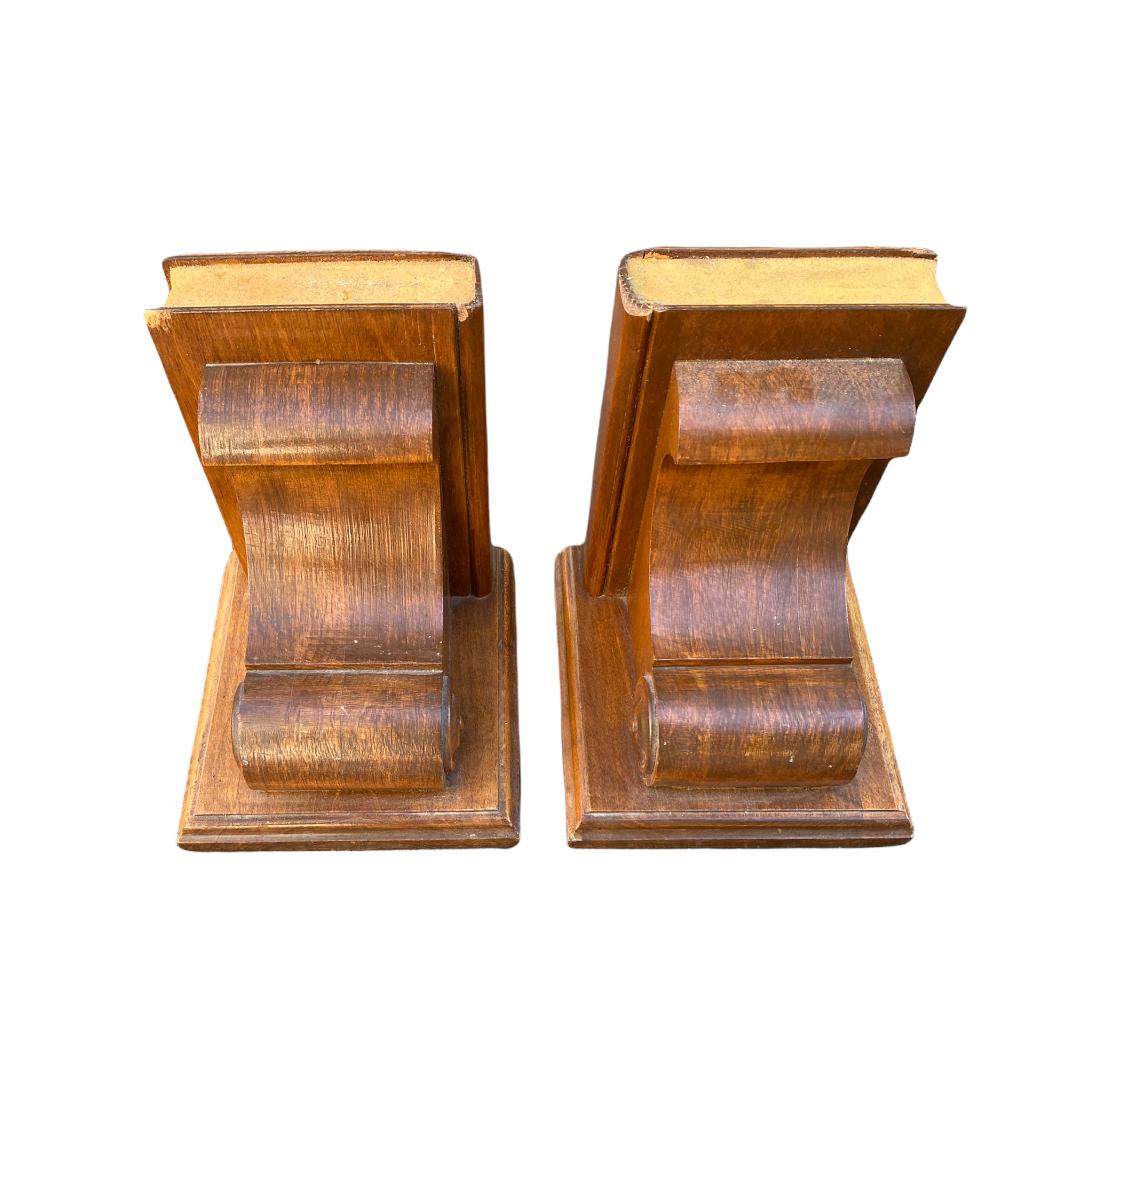 Wood Antique Bookends with Academic Motif